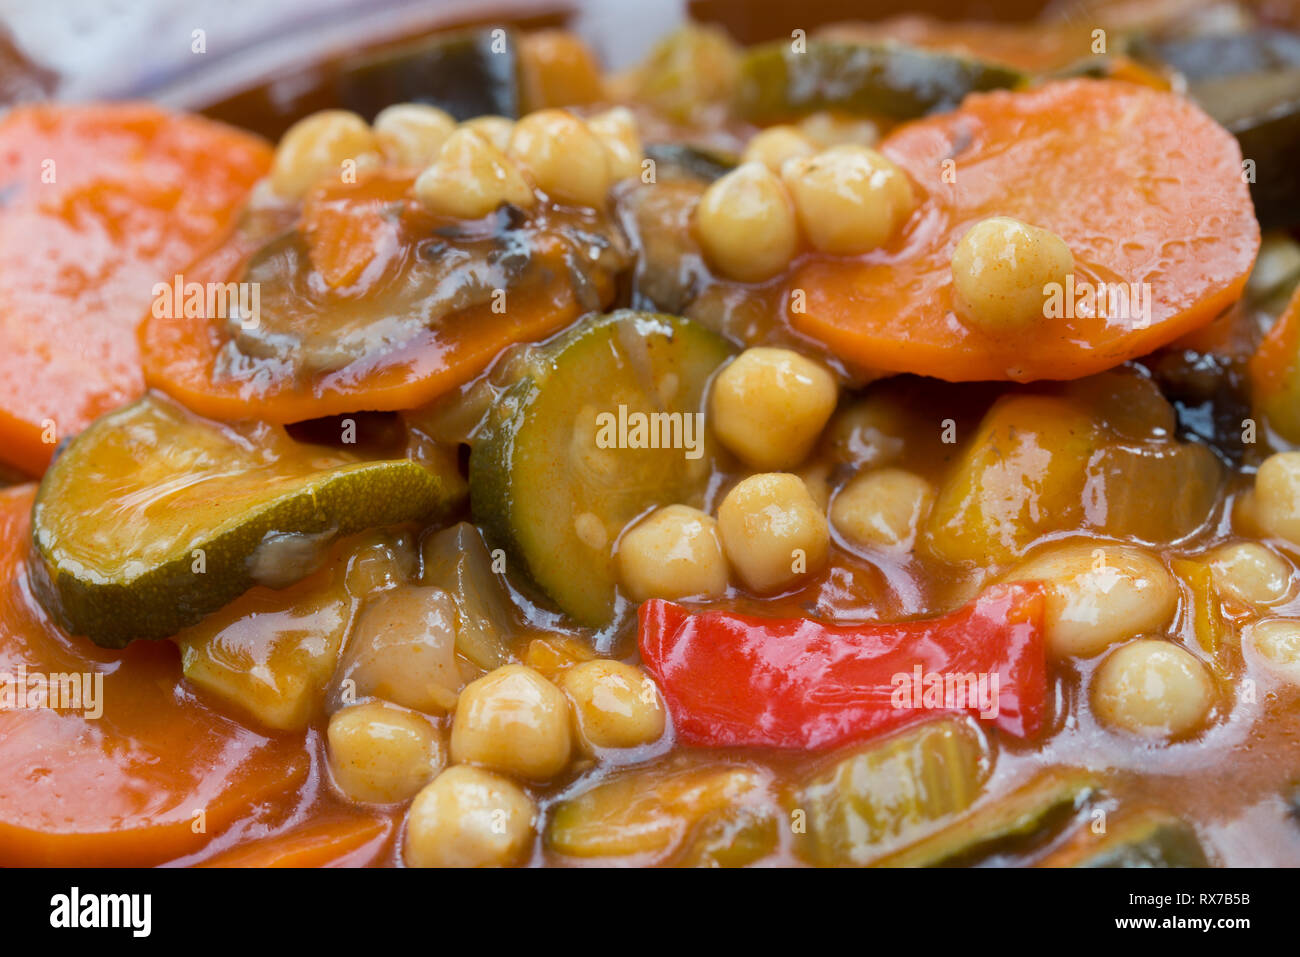 vegan meal with vegetables and chickpeas macro Stock Photo